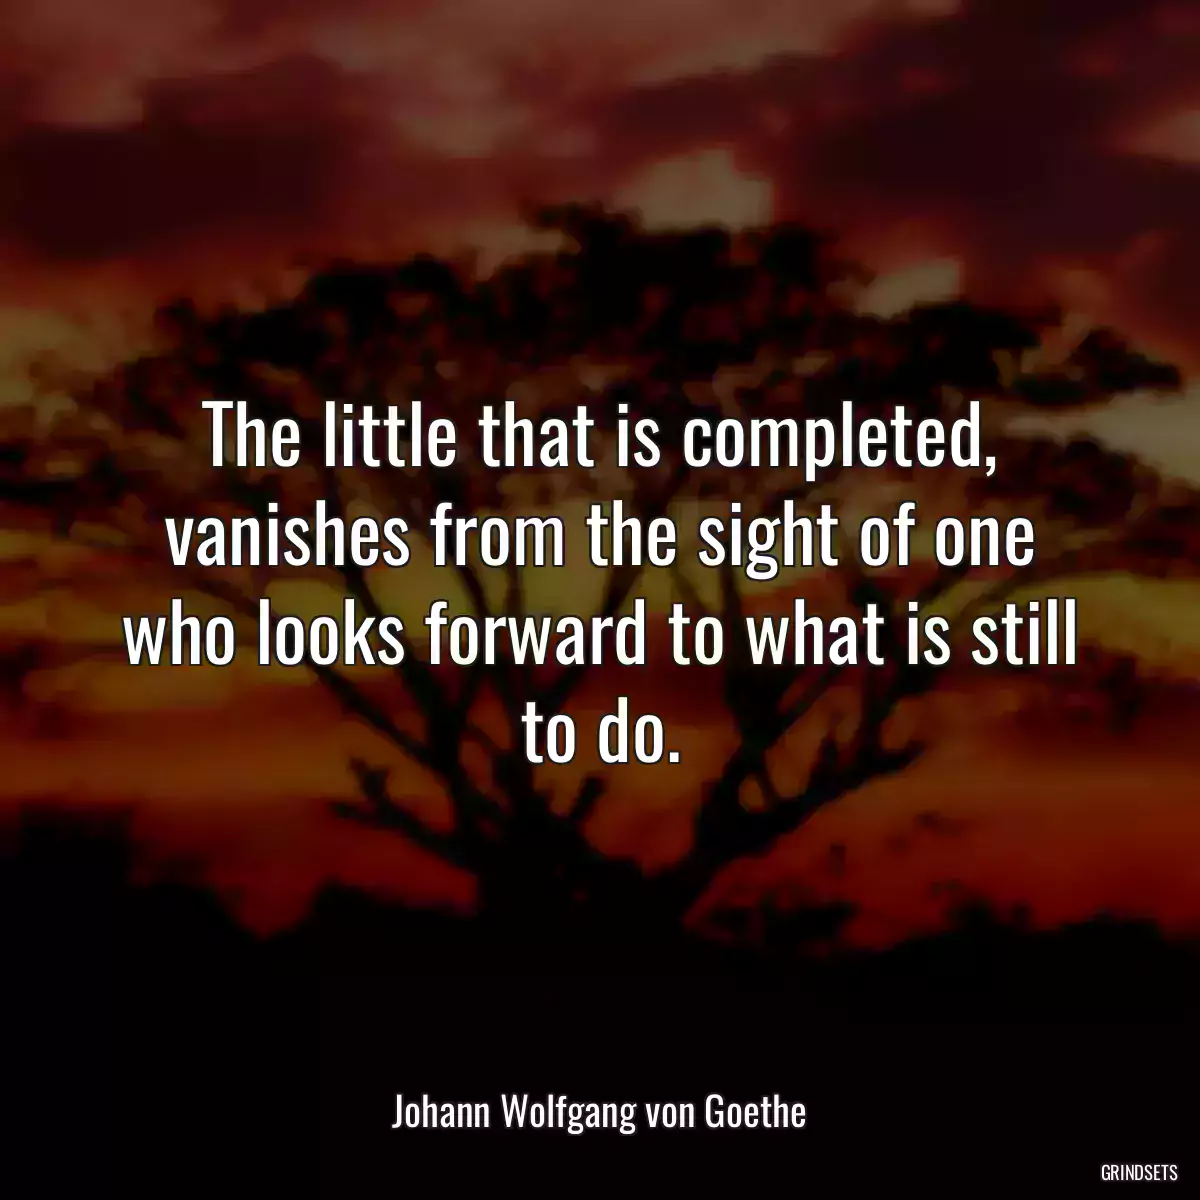 The little that is completed, vanishes from the sight of one who looks forward to what is still to do.